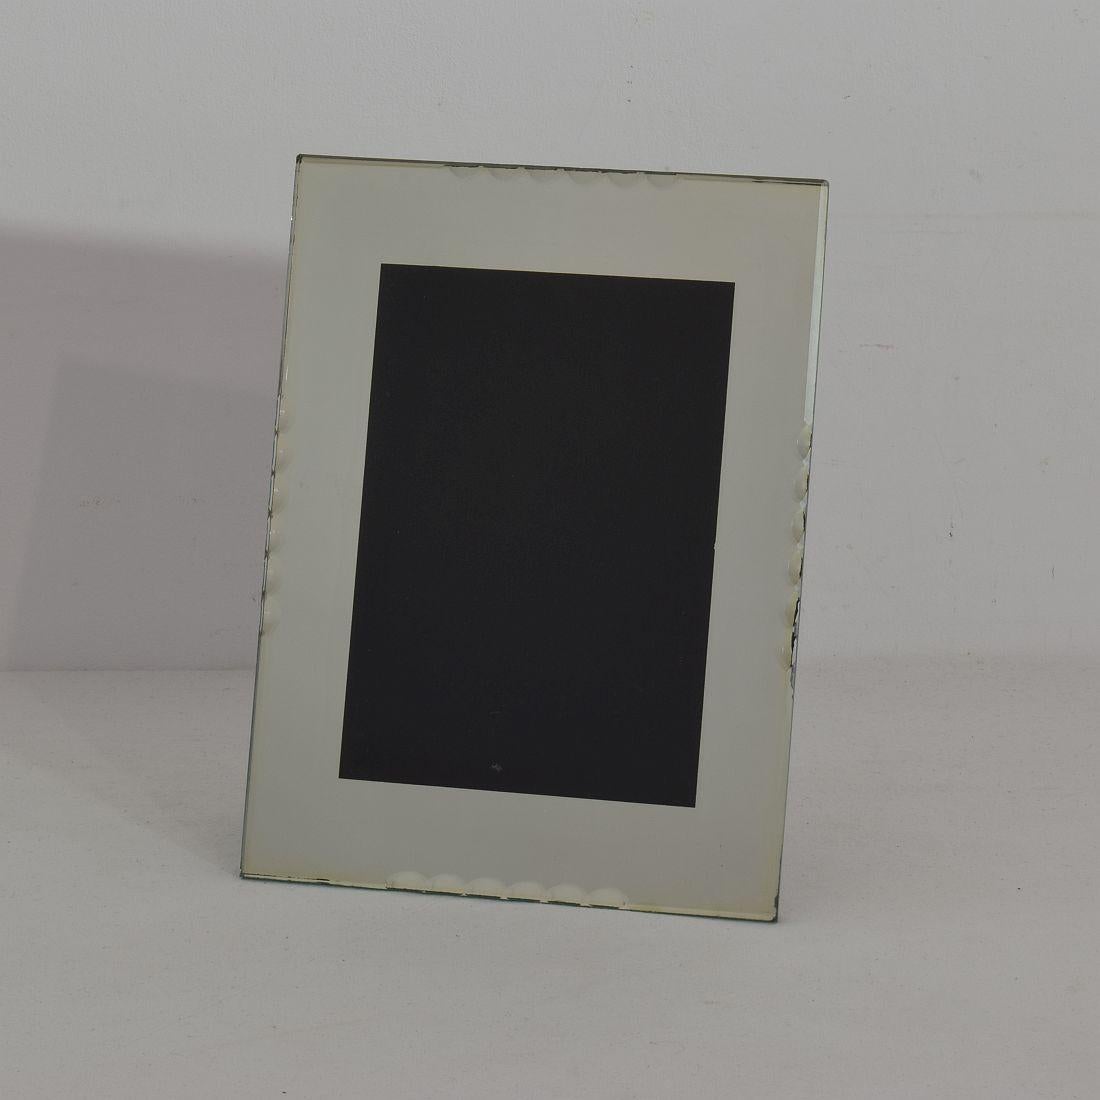 Pair of elegant French Hollywood Regency mirror picture photo frames. Lovely clear mirrored glass. Picture frames can be placed either in portrait or in landscape position. Easel and back in decorative paper.
Measurements: H 24-36cm, W 18-30cm, D 1